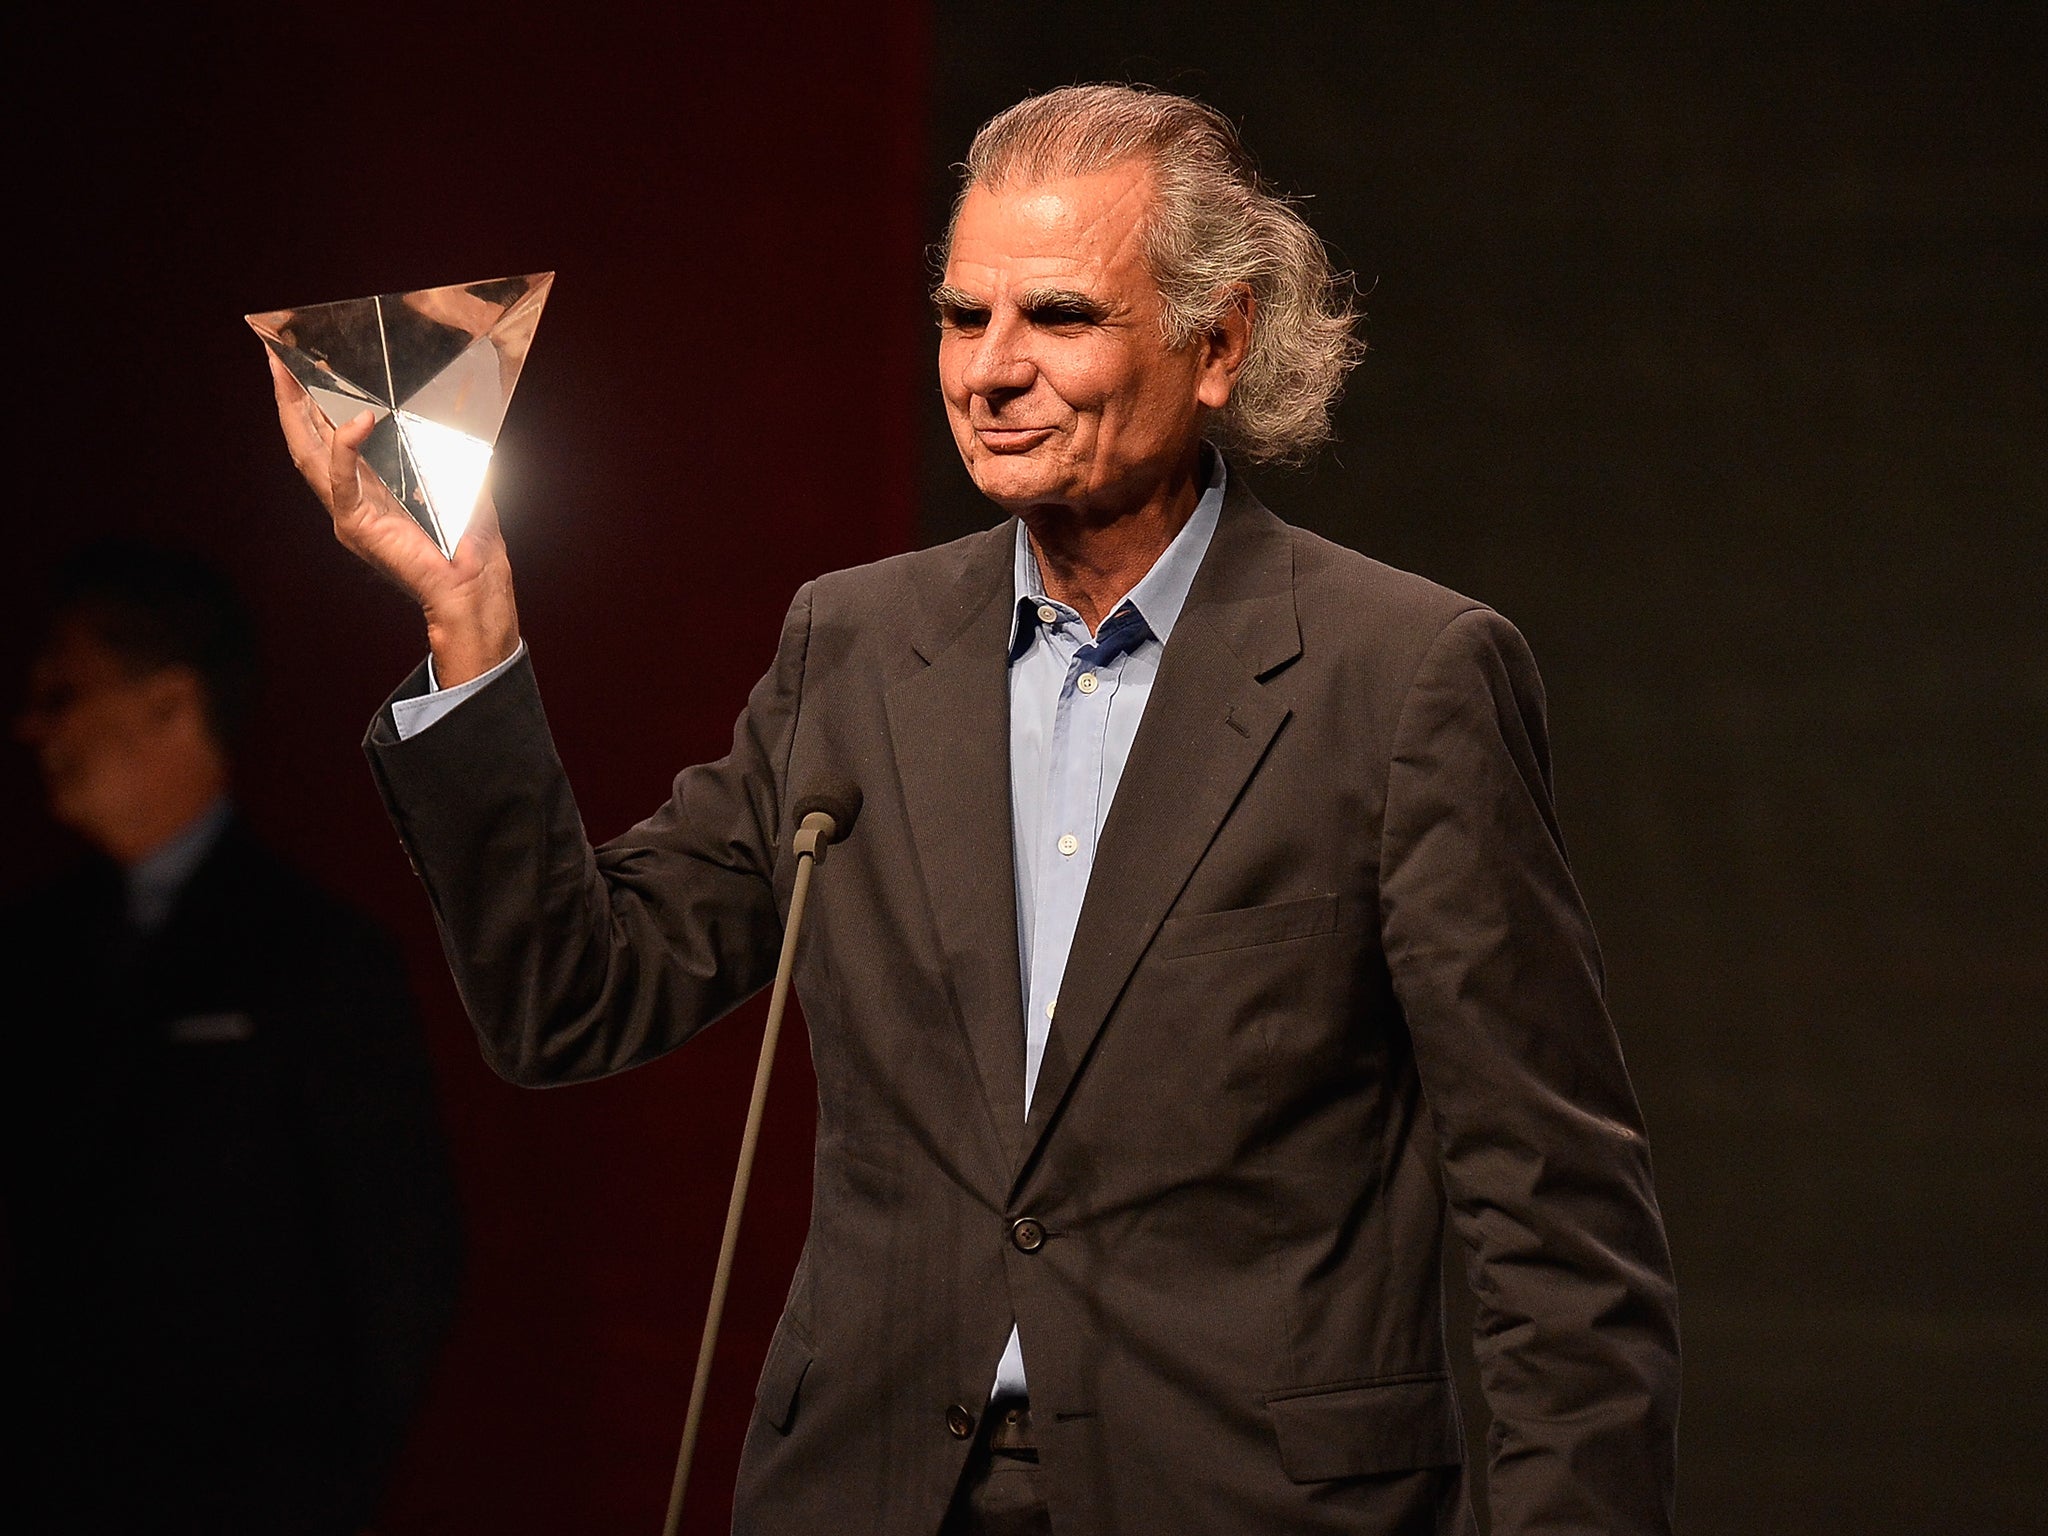 Demarchelier receiving the Photographer of the Year award in 2013